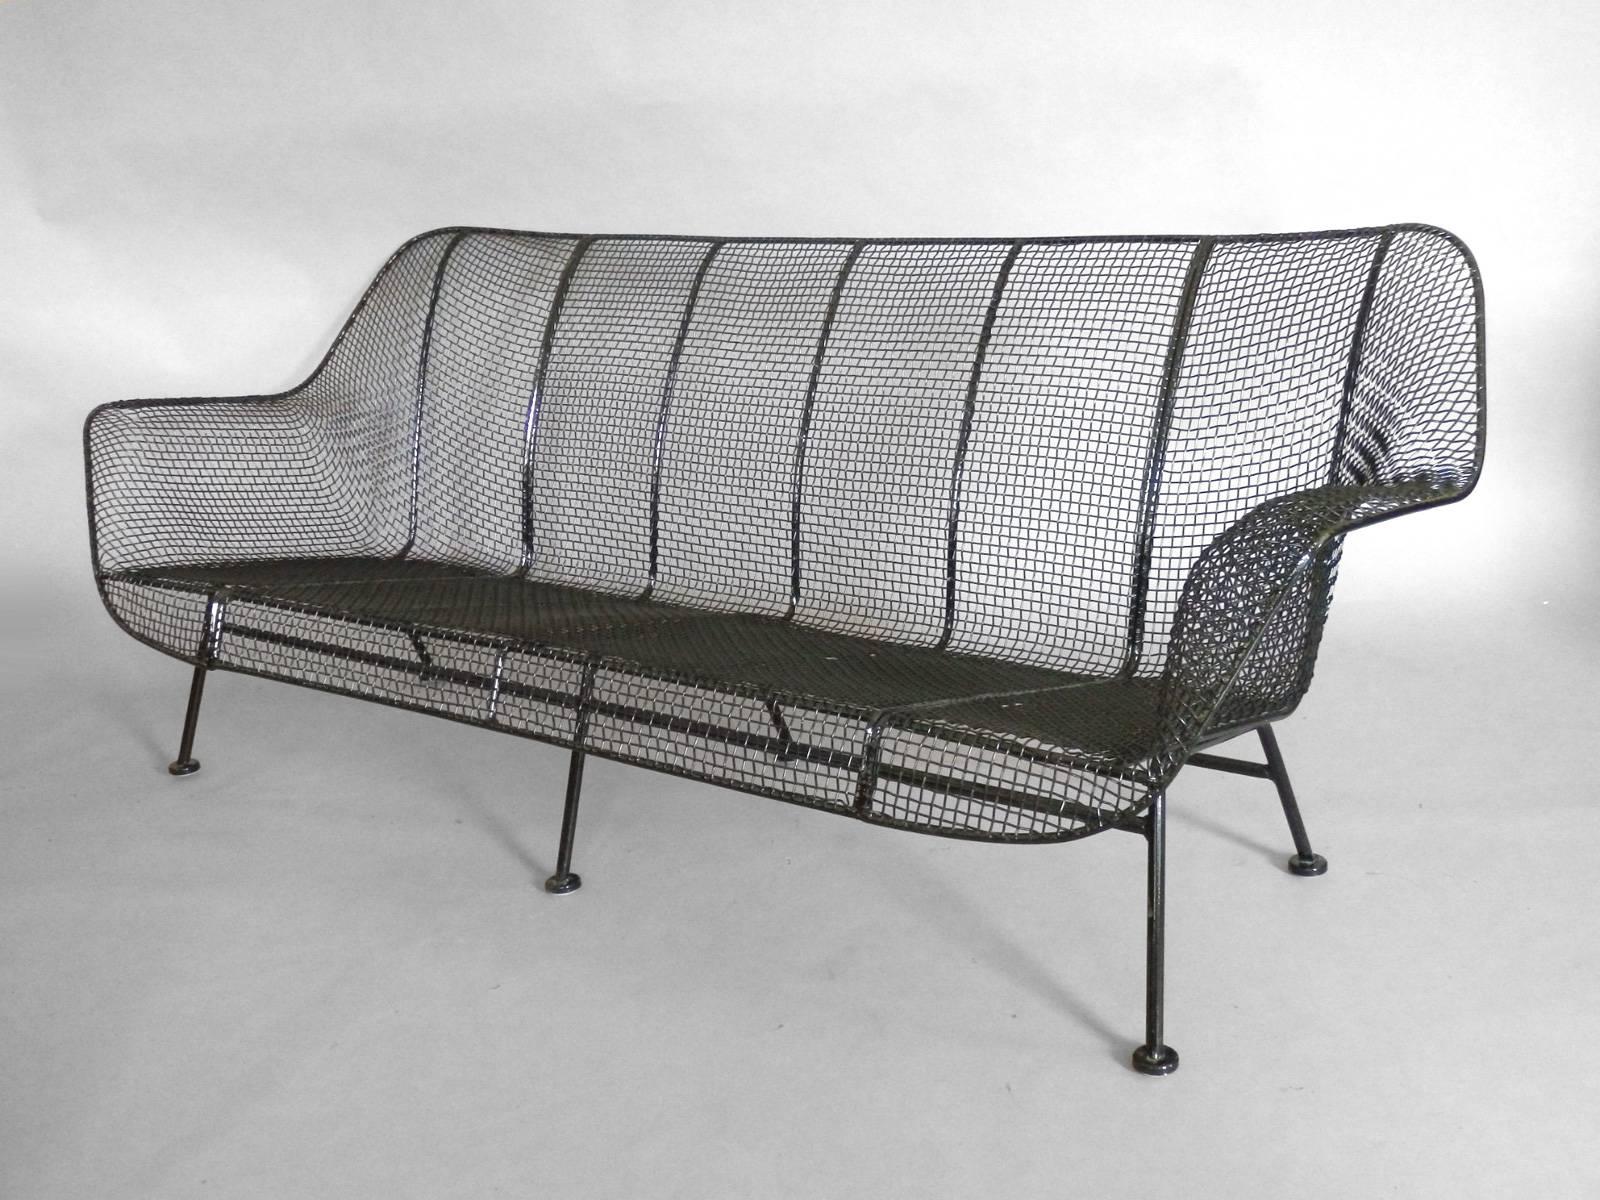 Wrought iron couch by Russell Lee Woodard for Woodard. Freshly powder coated in gloss black with new glides added .  The best 